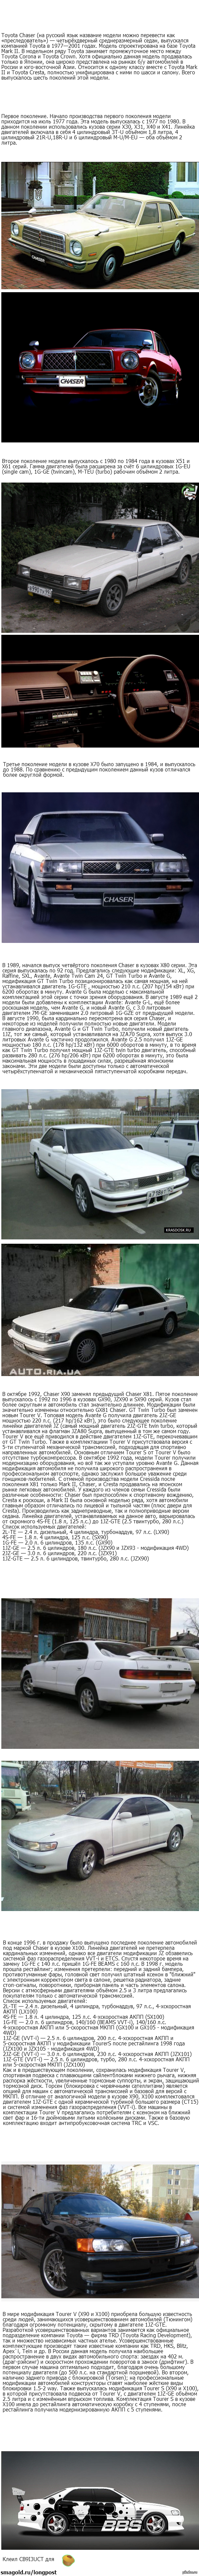 Continuing the theme of the Japanese car industry: Toyota Chaser. - Toyota, Toyota chaser, Japan, Auto, Longpost